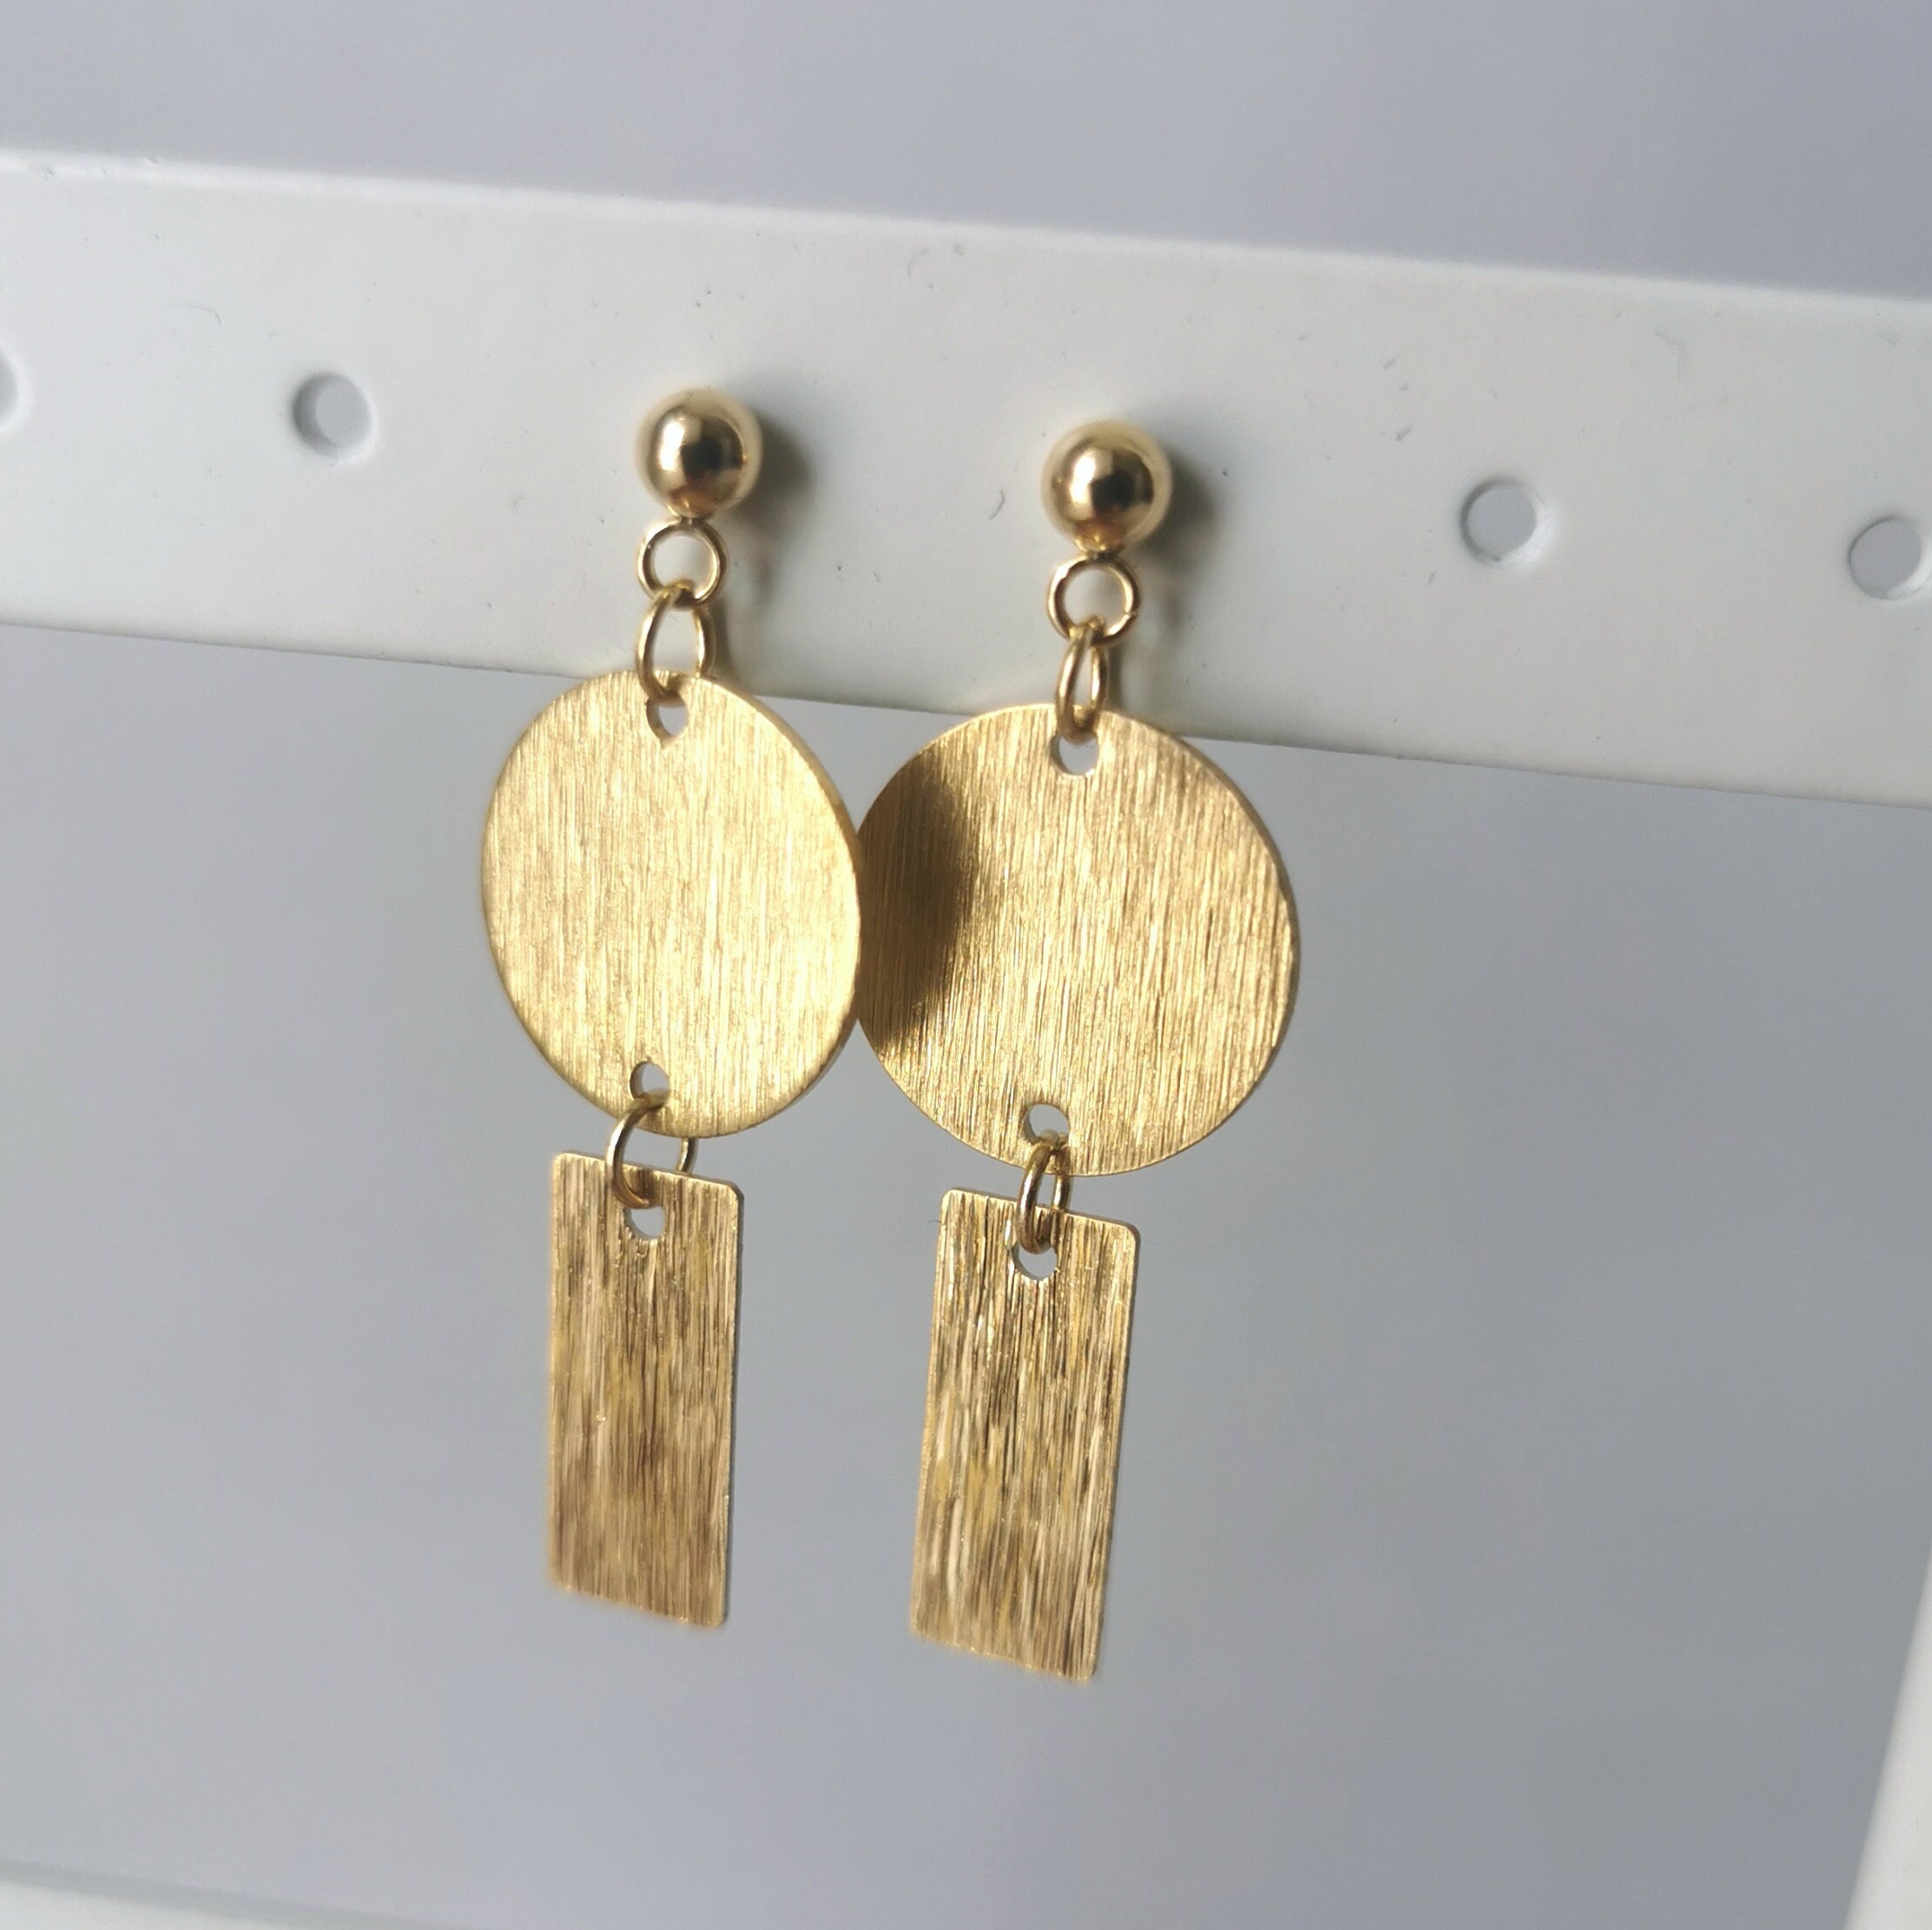 Gold Brass Geometric Earrings With Textured Circle & Rectangle Charm 18K Plated Ball Stud